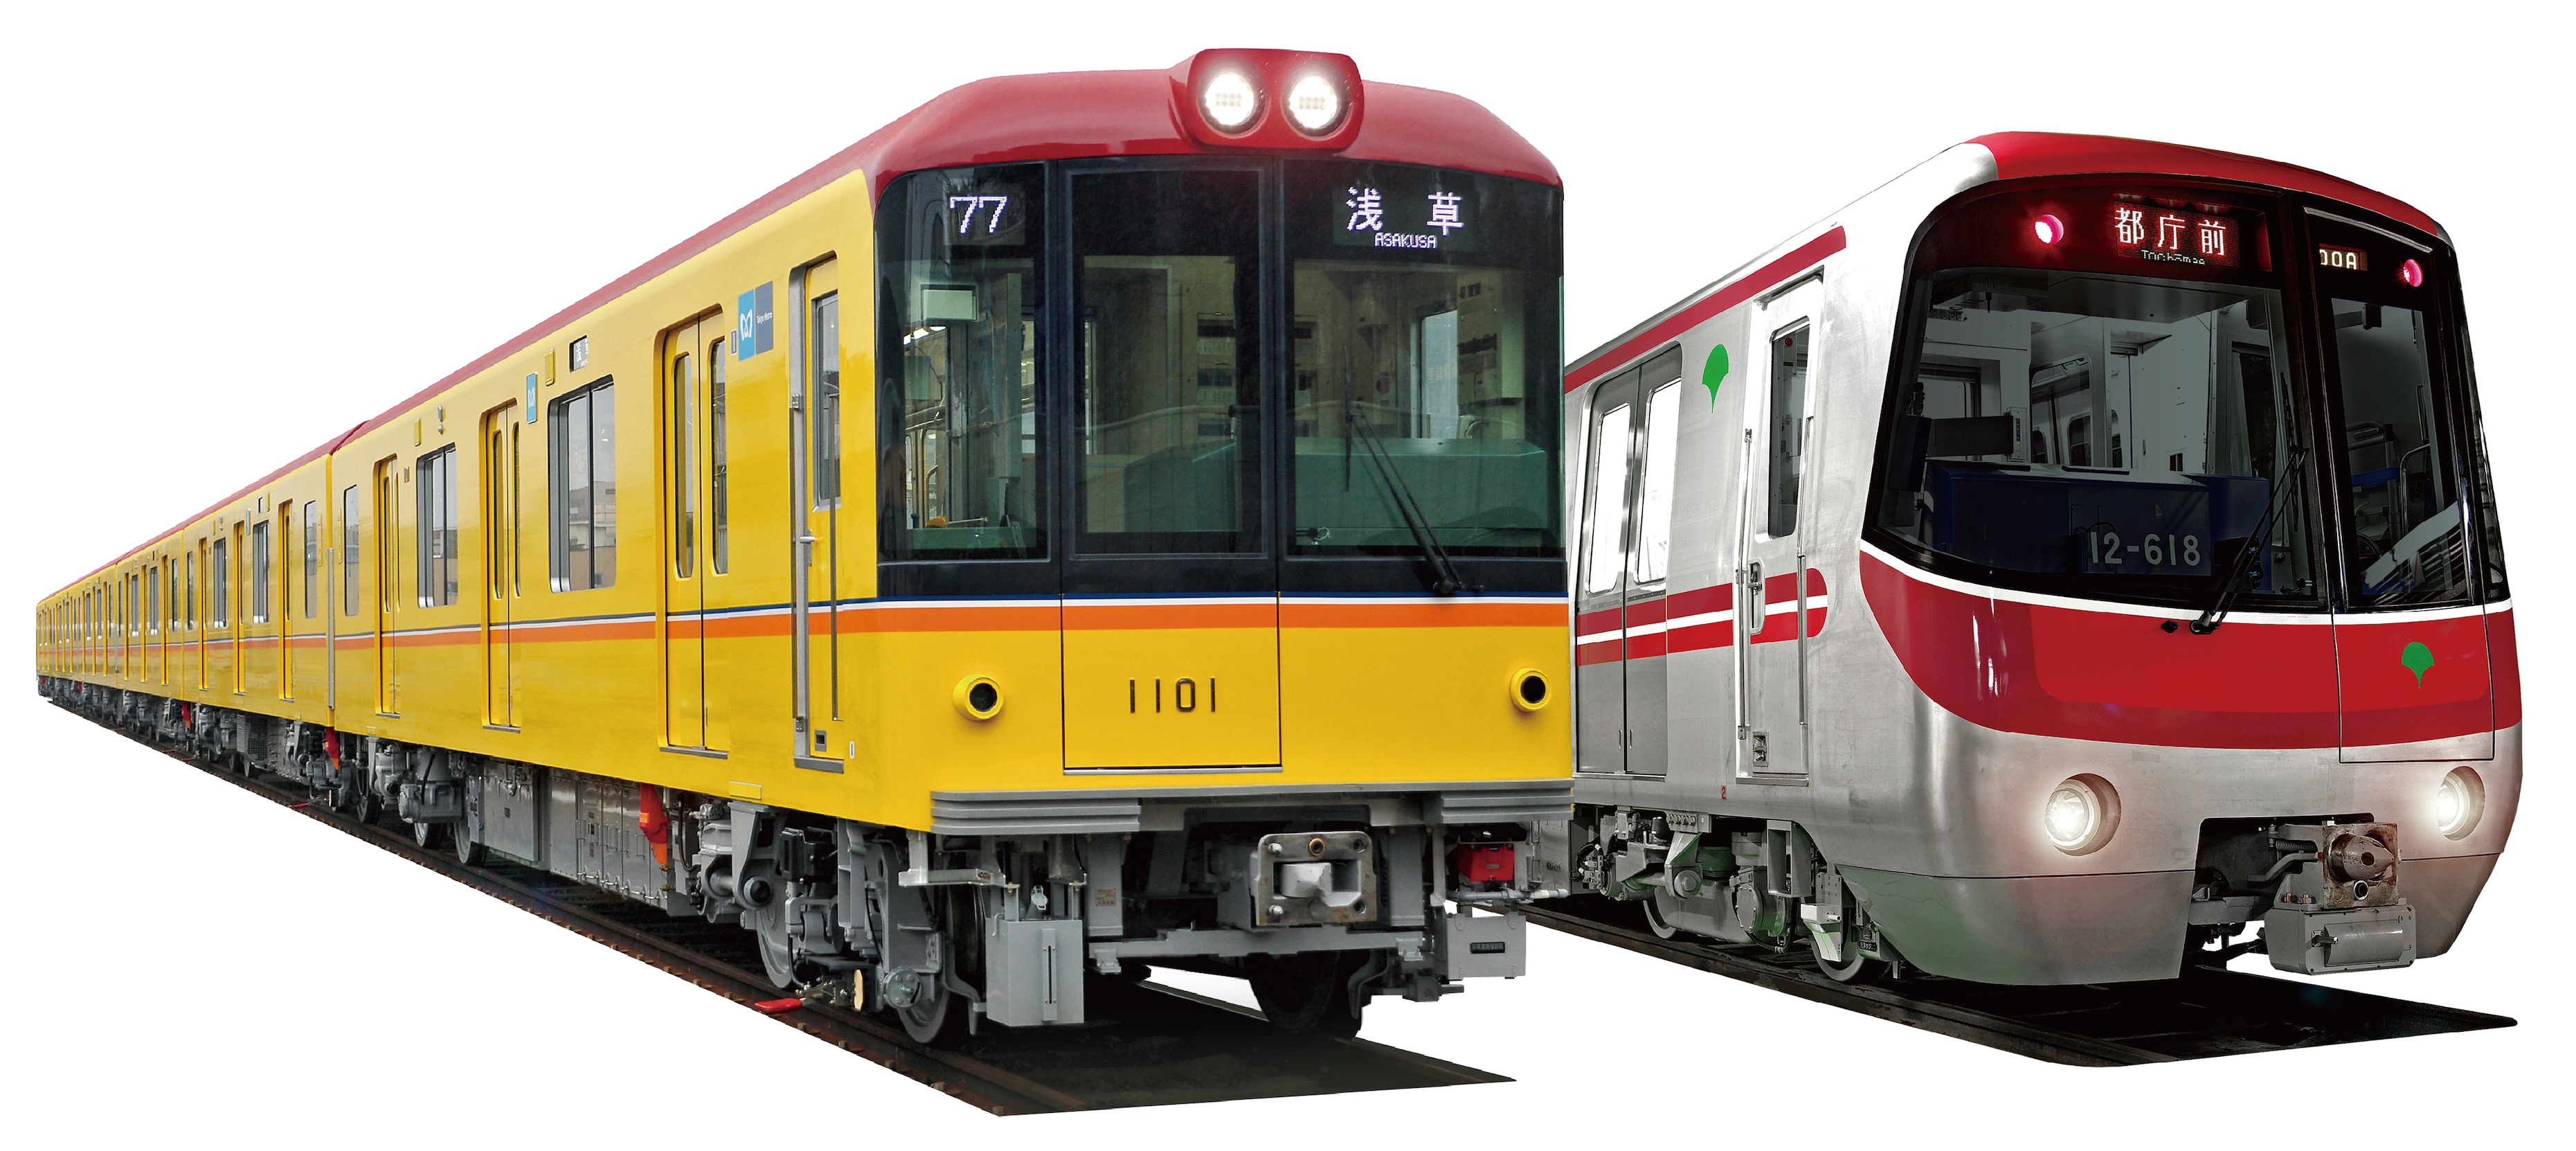 Combo Ticket - Spa LaQua admission Ticket and Tokyo Subway Ticket (24-hour) [Save up to JPY 310!]